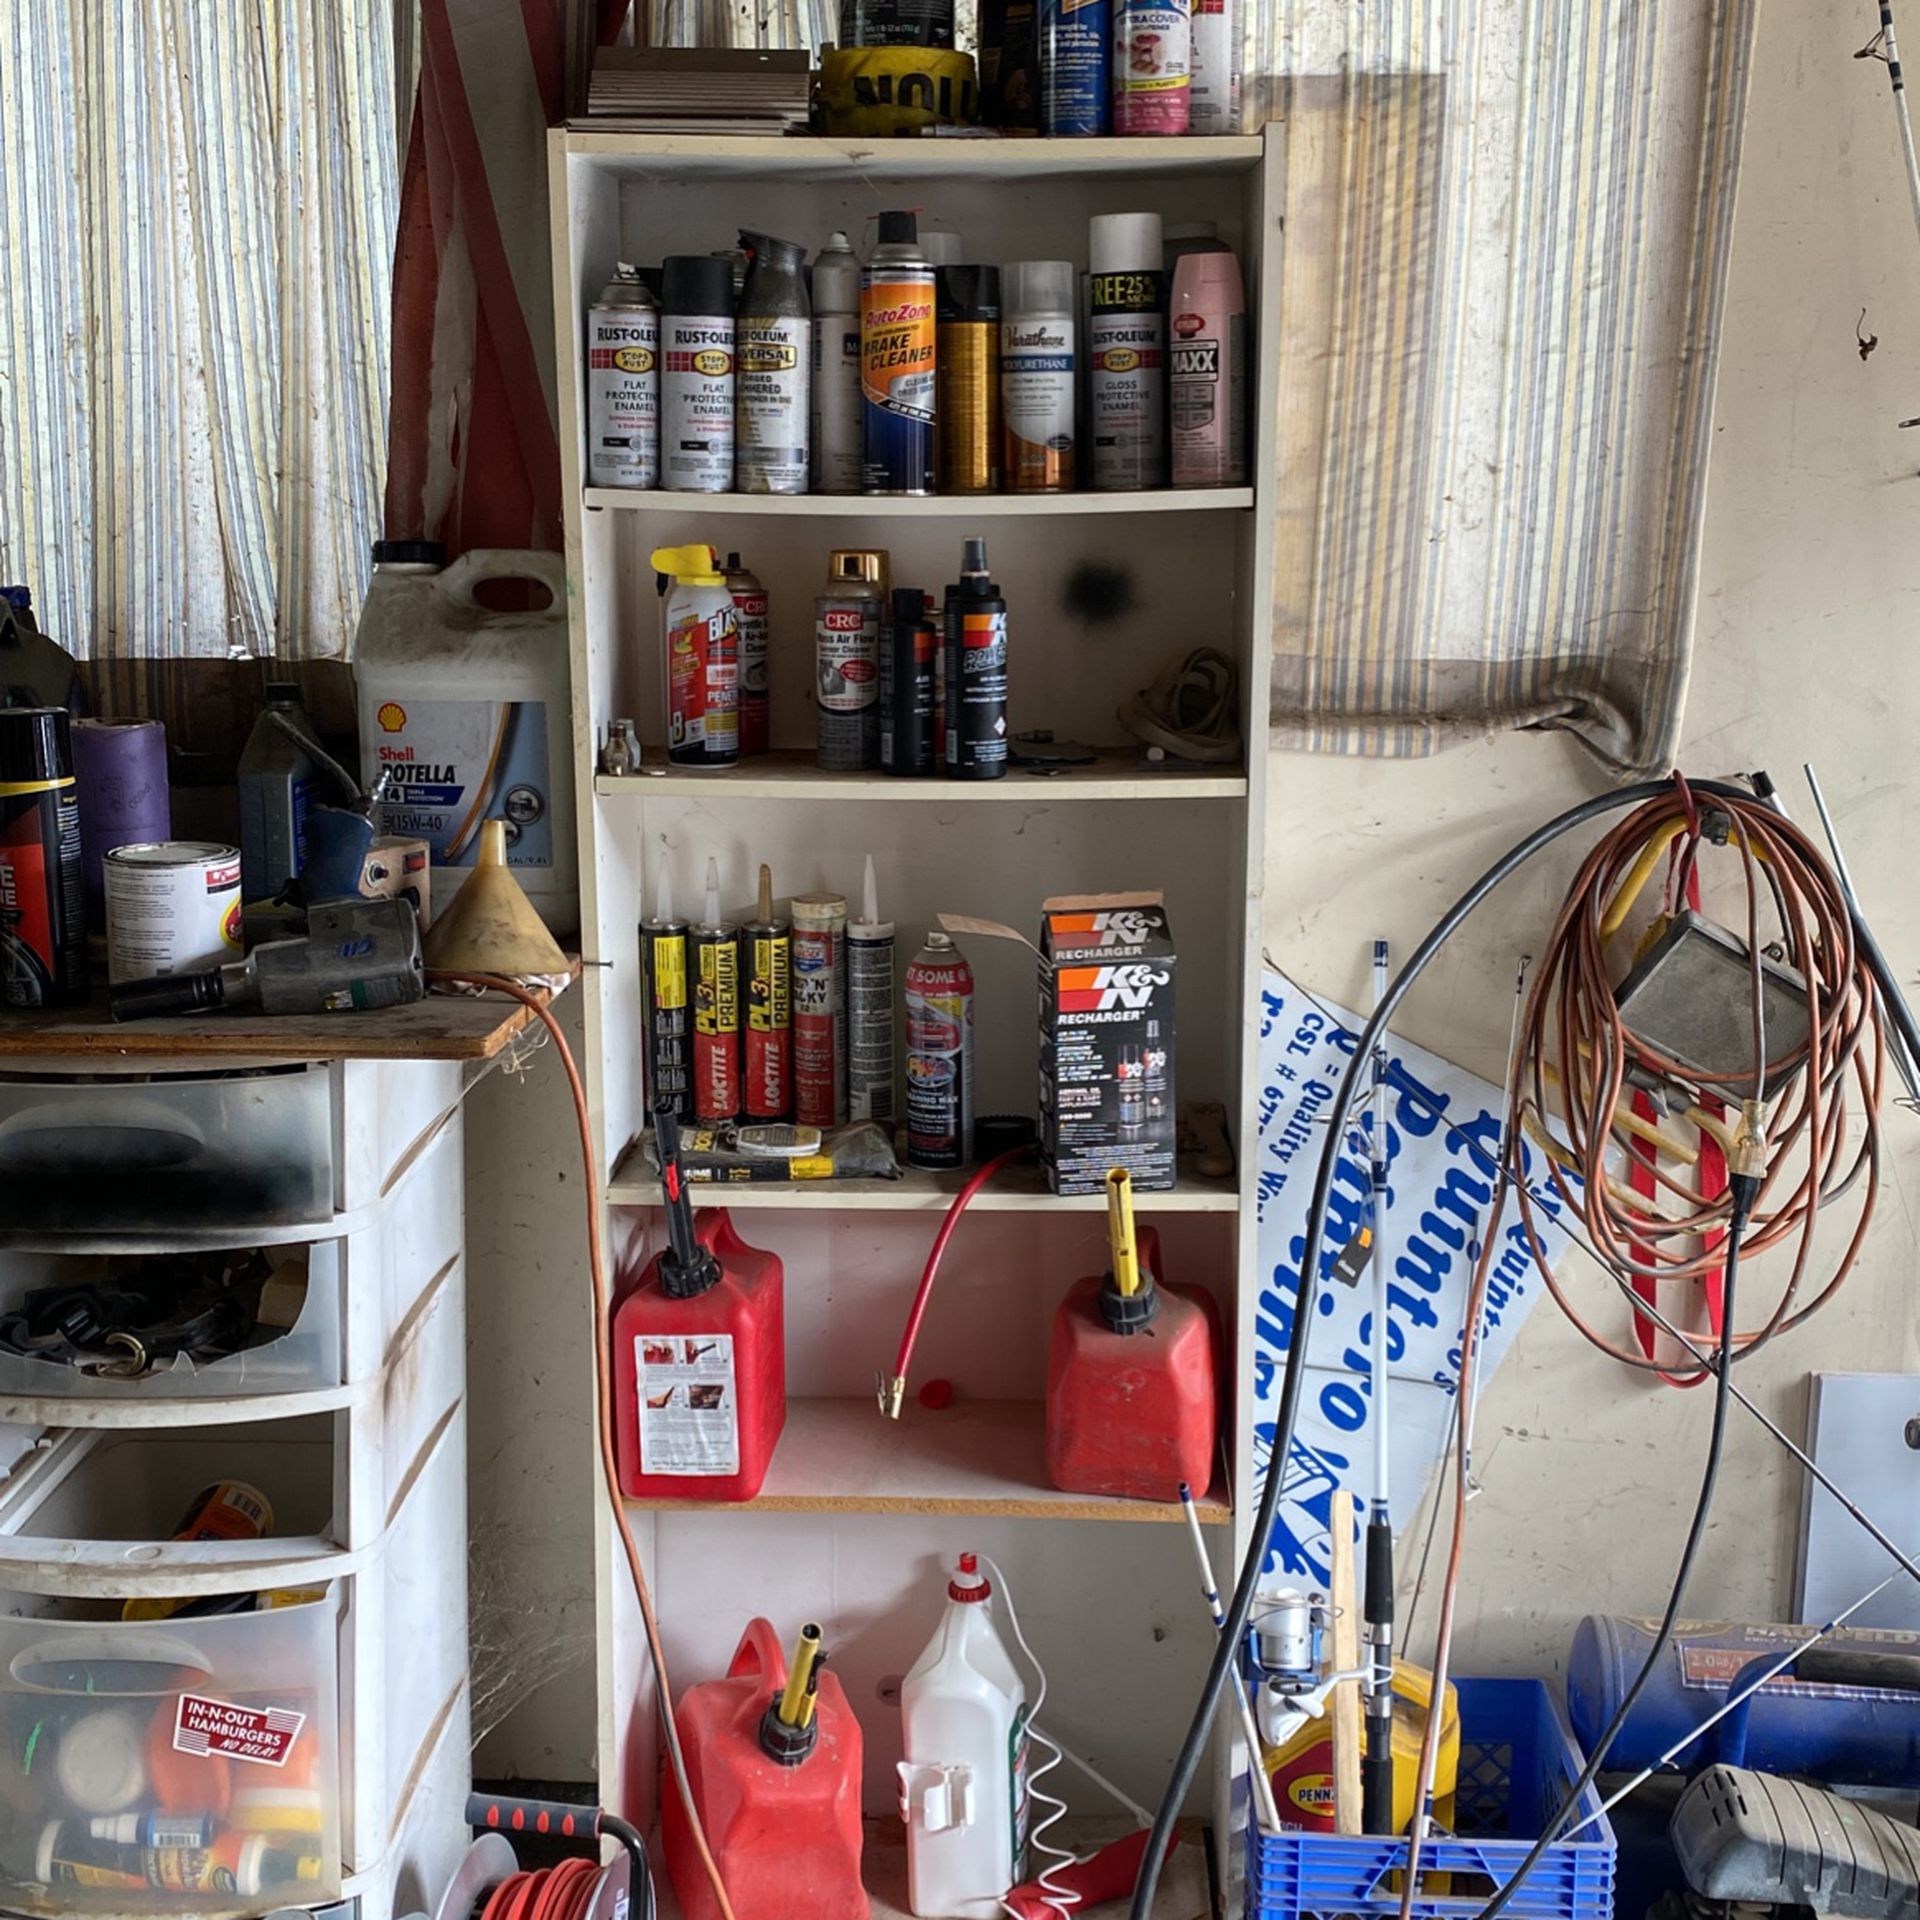 Spray Paint And Cleaners, Buck A Can Shelf For Sale To